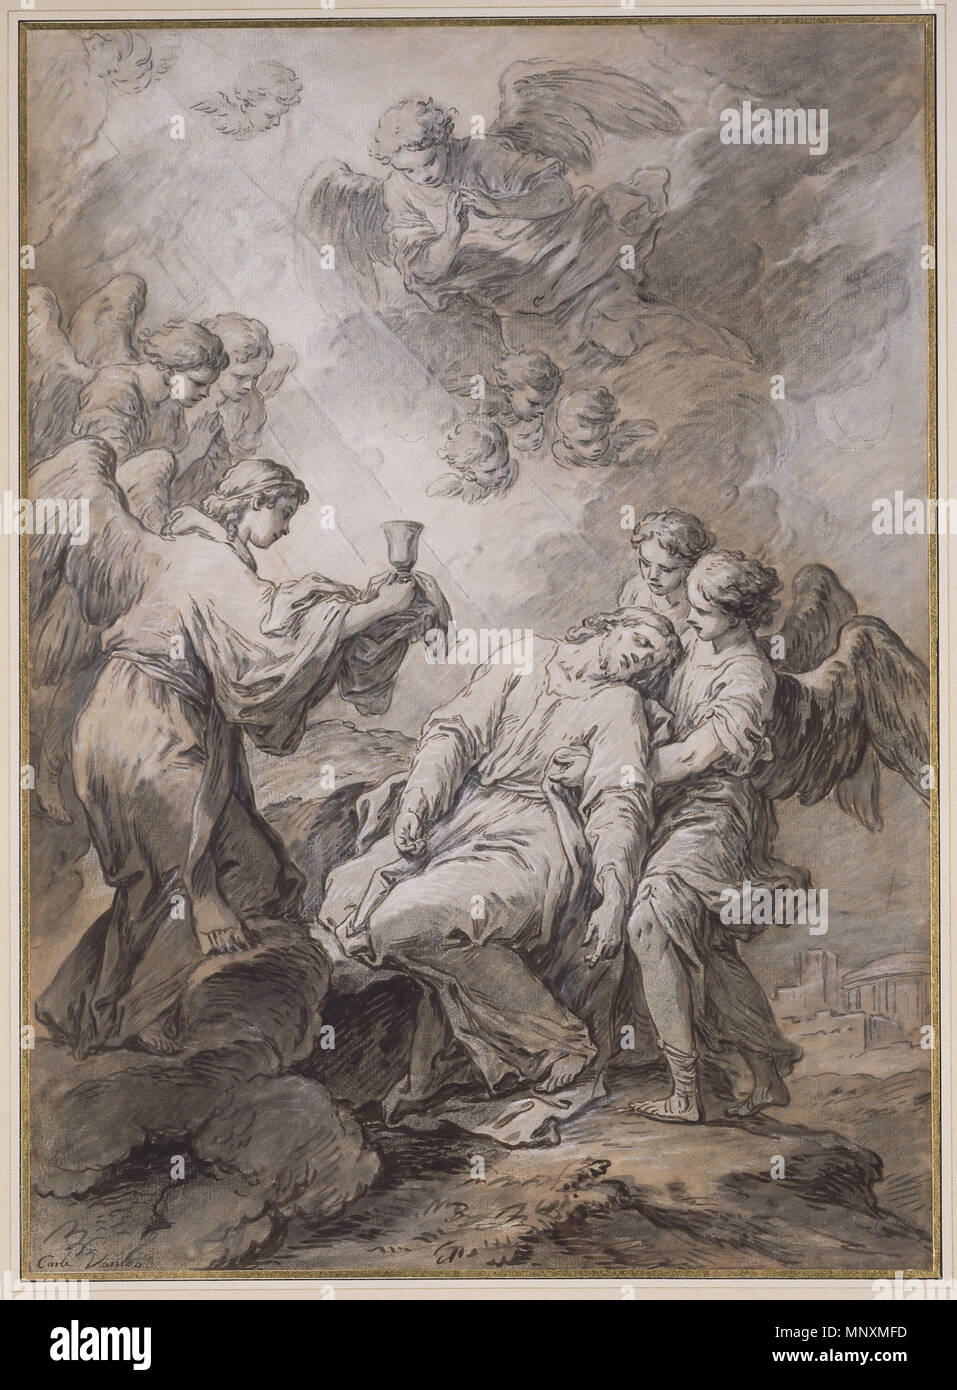 The Agony in the Garden; Carle Vanloo (French, 1705 - 1765); about 1760; Pen and brown ink, brown and gray wash, heightened with white gouache, over black chalk; 46 x 33.2 cm (18 1/8 x 13 1/16 in.); 2000.62   The Agony in the Garden   circa 1760.   1168 The Agony in the Garden Stock Photo